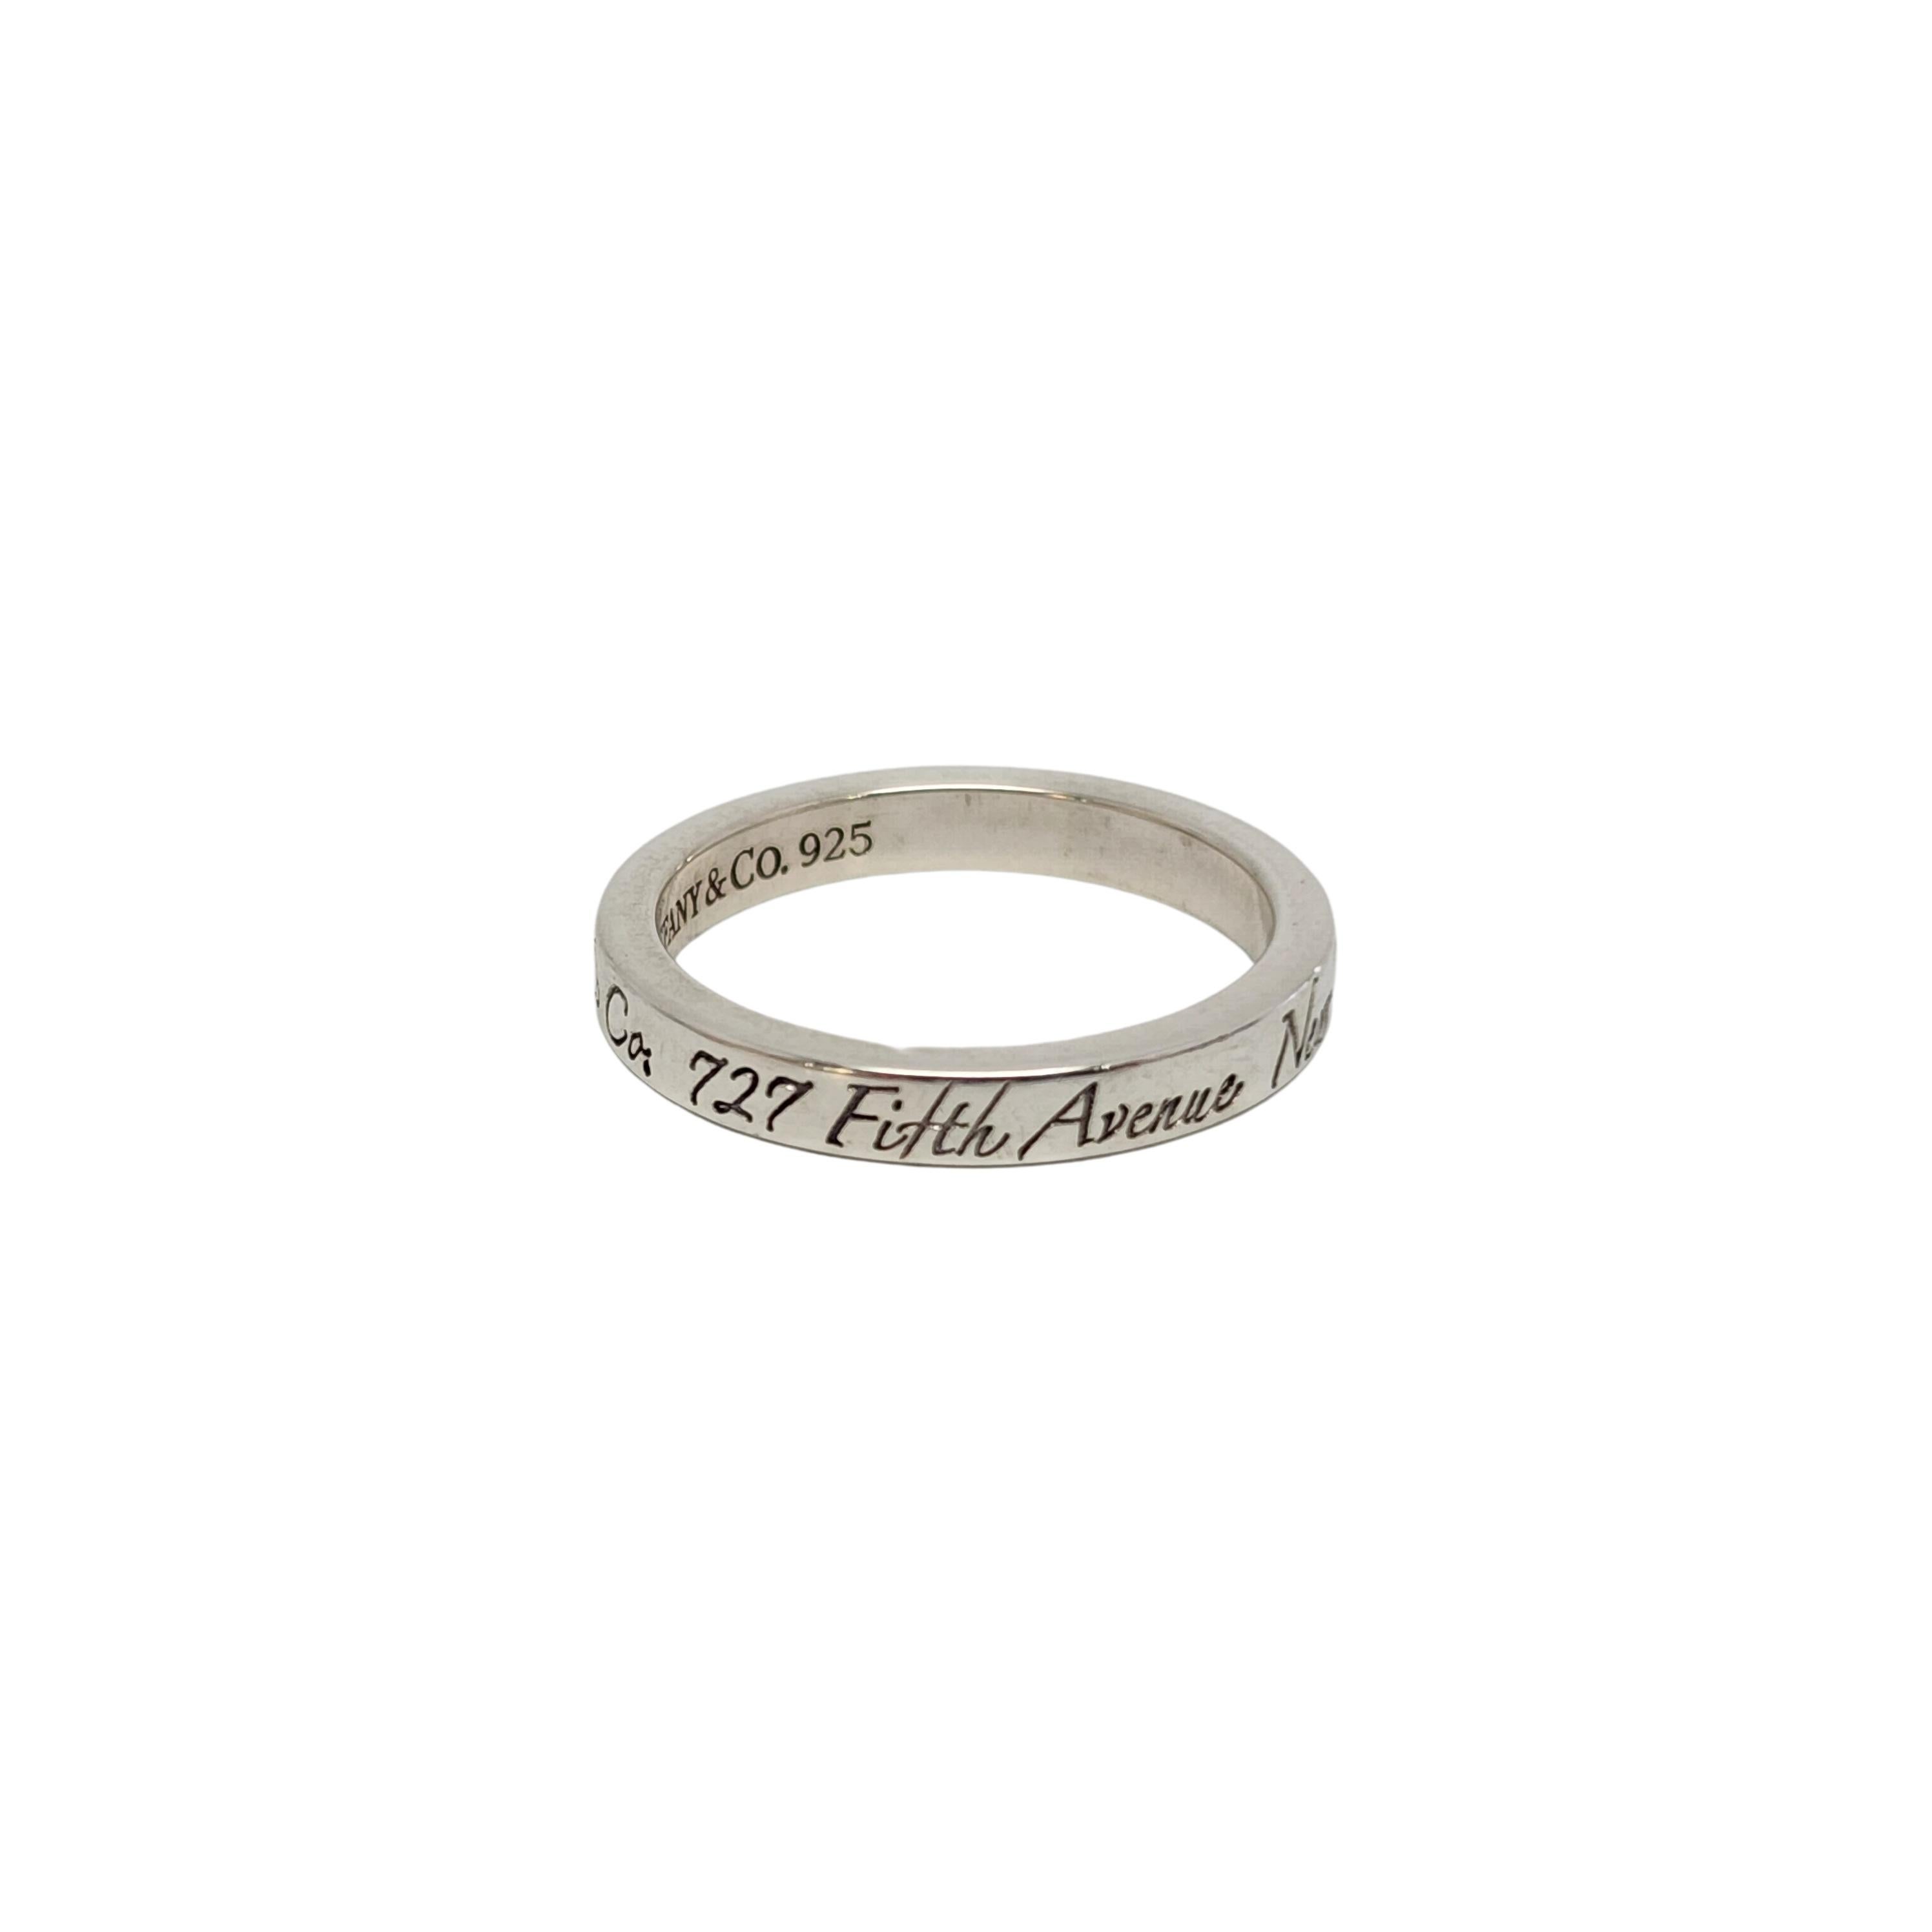 Tiffany & Co sterling silver NY Address Notes narrow band ring.

Size 5 1/4

Authentic Tiffany ring inscribed with Tiffany's NYC 5th Ave address. Tiffany pouch and box not included.

Band measures approx 2.8mm wide.

Weighs approx 2.6g, 1.7dwt

Very